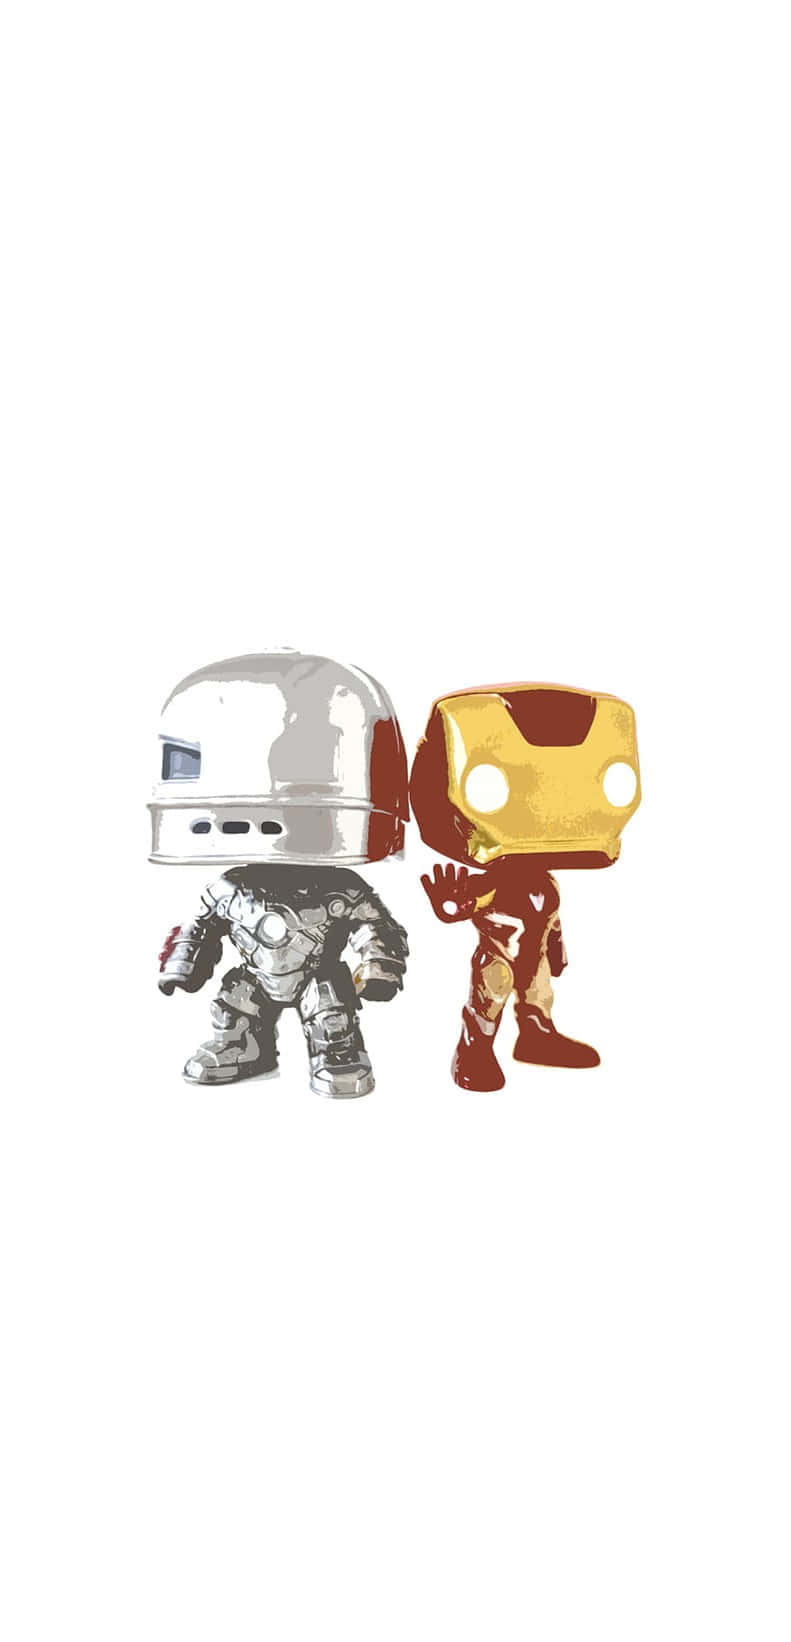 Adorn your desk with these cool Iron Man Pop Figures Wallpaper